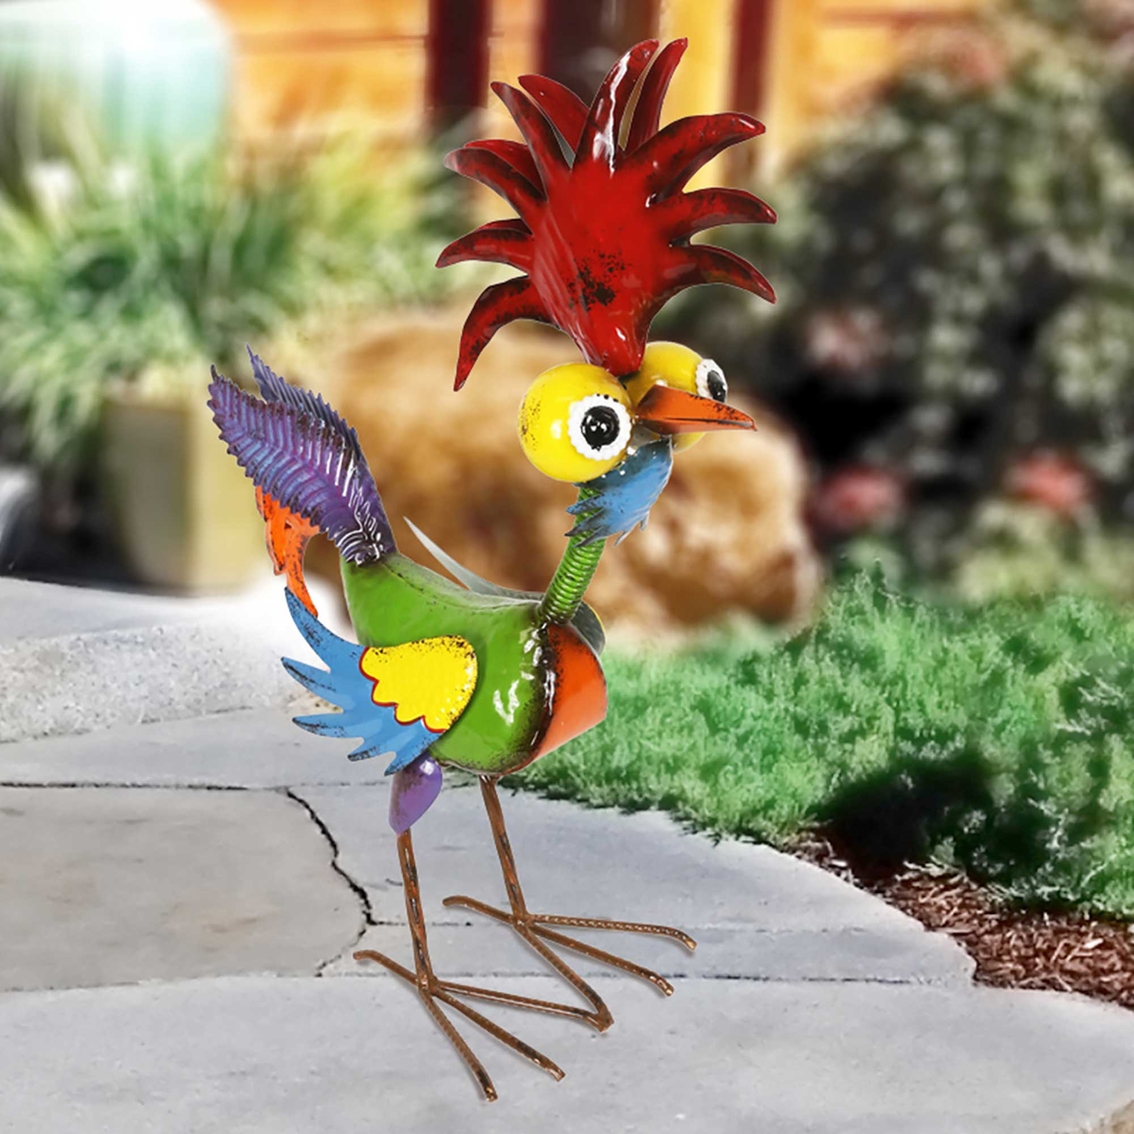 Alpine Wacky Tropical Metal Rooster Decor - Image 6 of 6